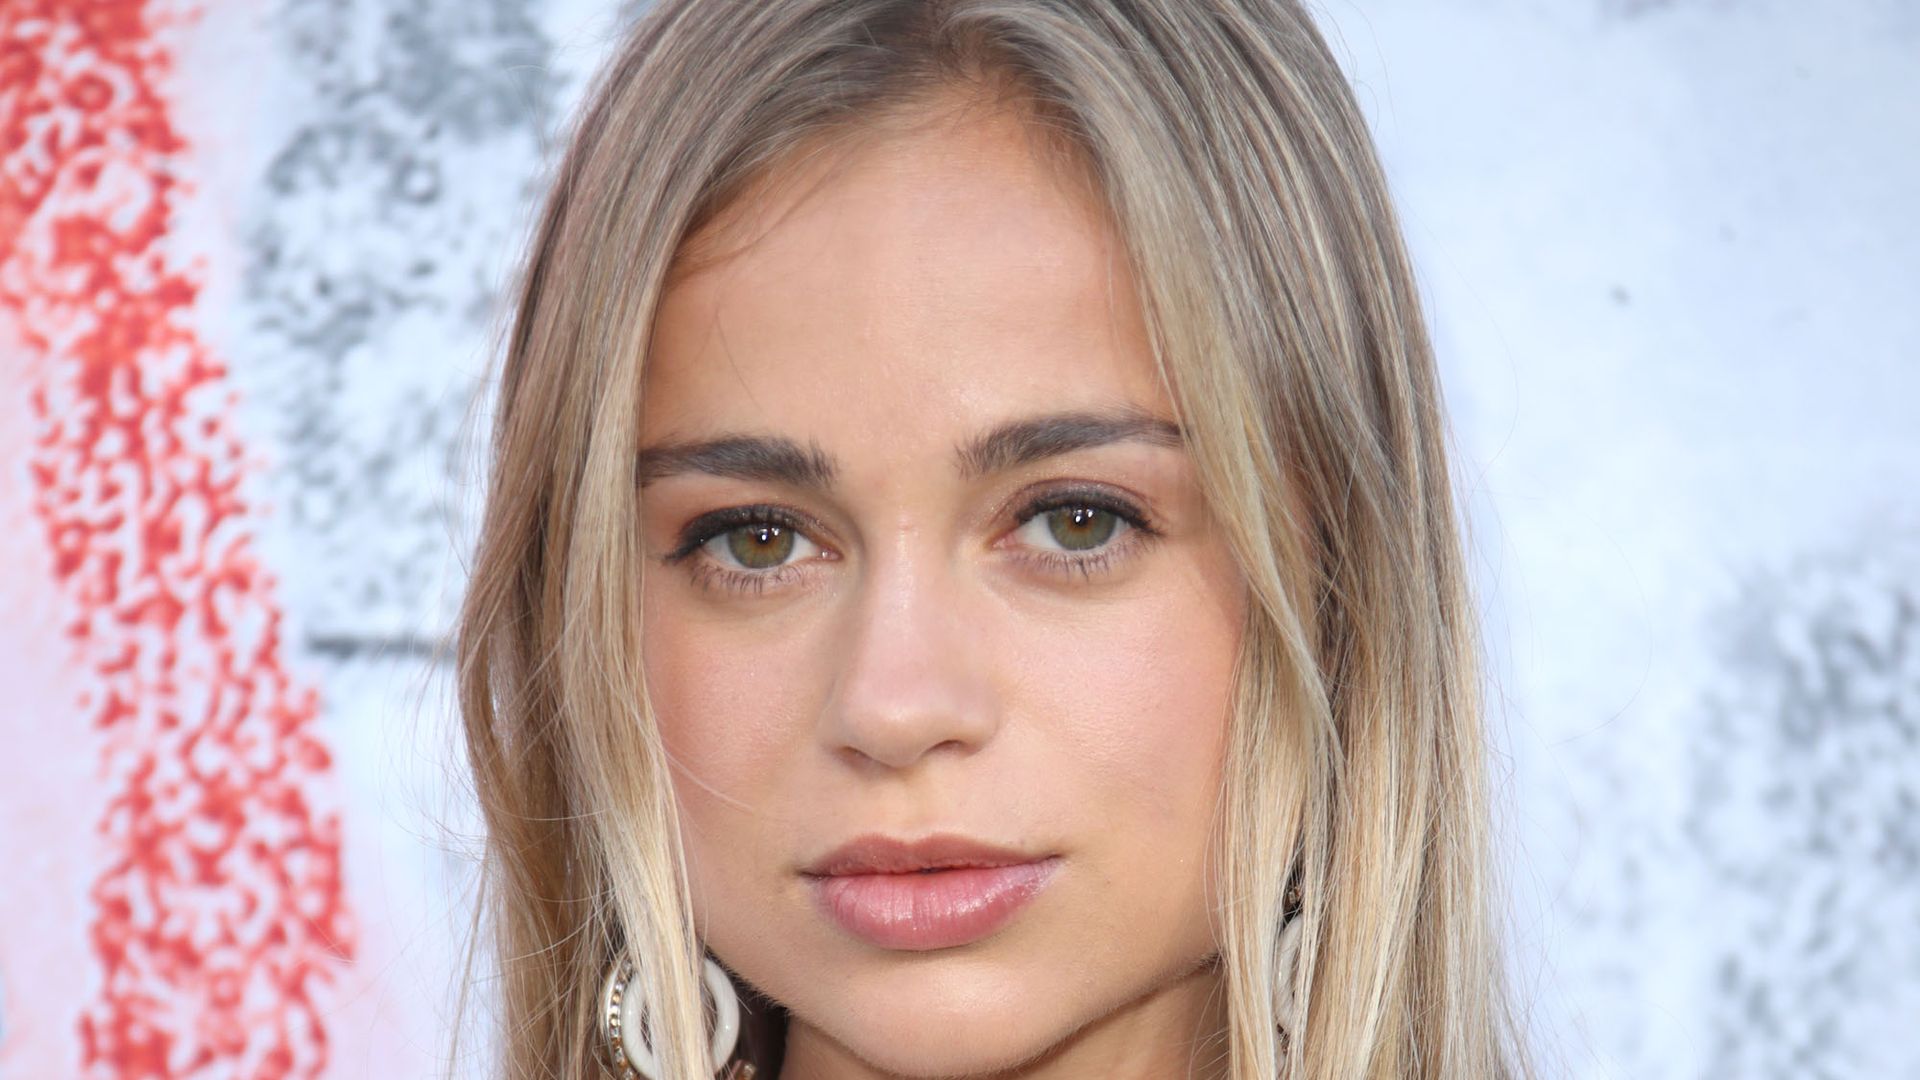 Amelia Windsor attends The Serpentine Summer Party at The Serpentine Gallery on June 19, 2018